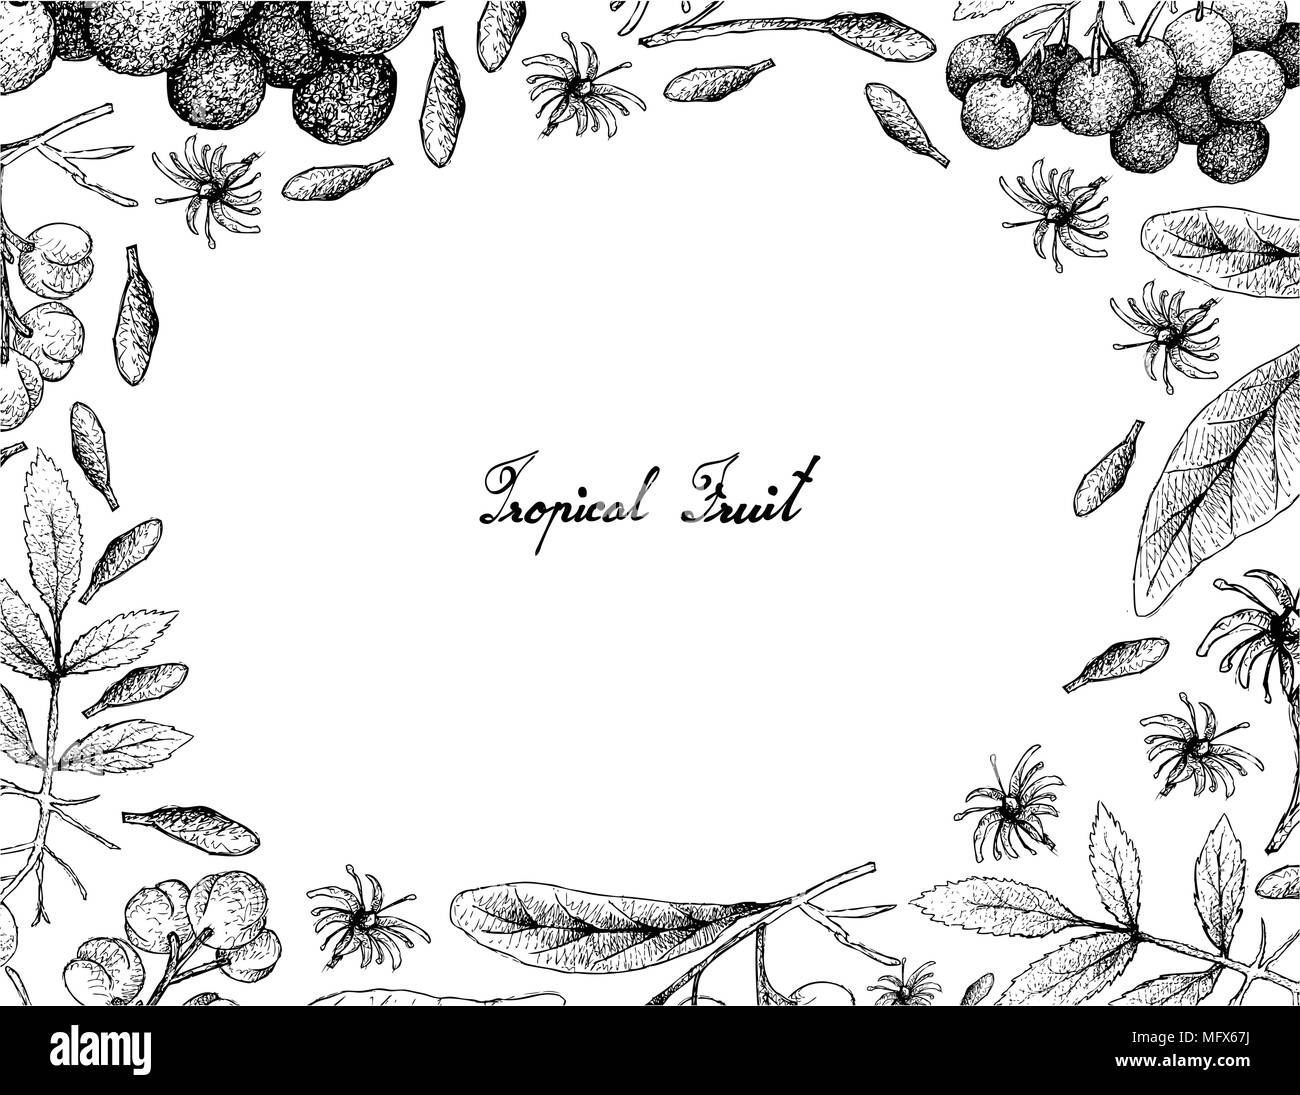 Berry Fruit, Illustration Frame of Hand Drawn Sketch of American Elder or Sambucus Canadensis and Acronychia Pedunculata Fruit Isolated on White Backg Stock Vector